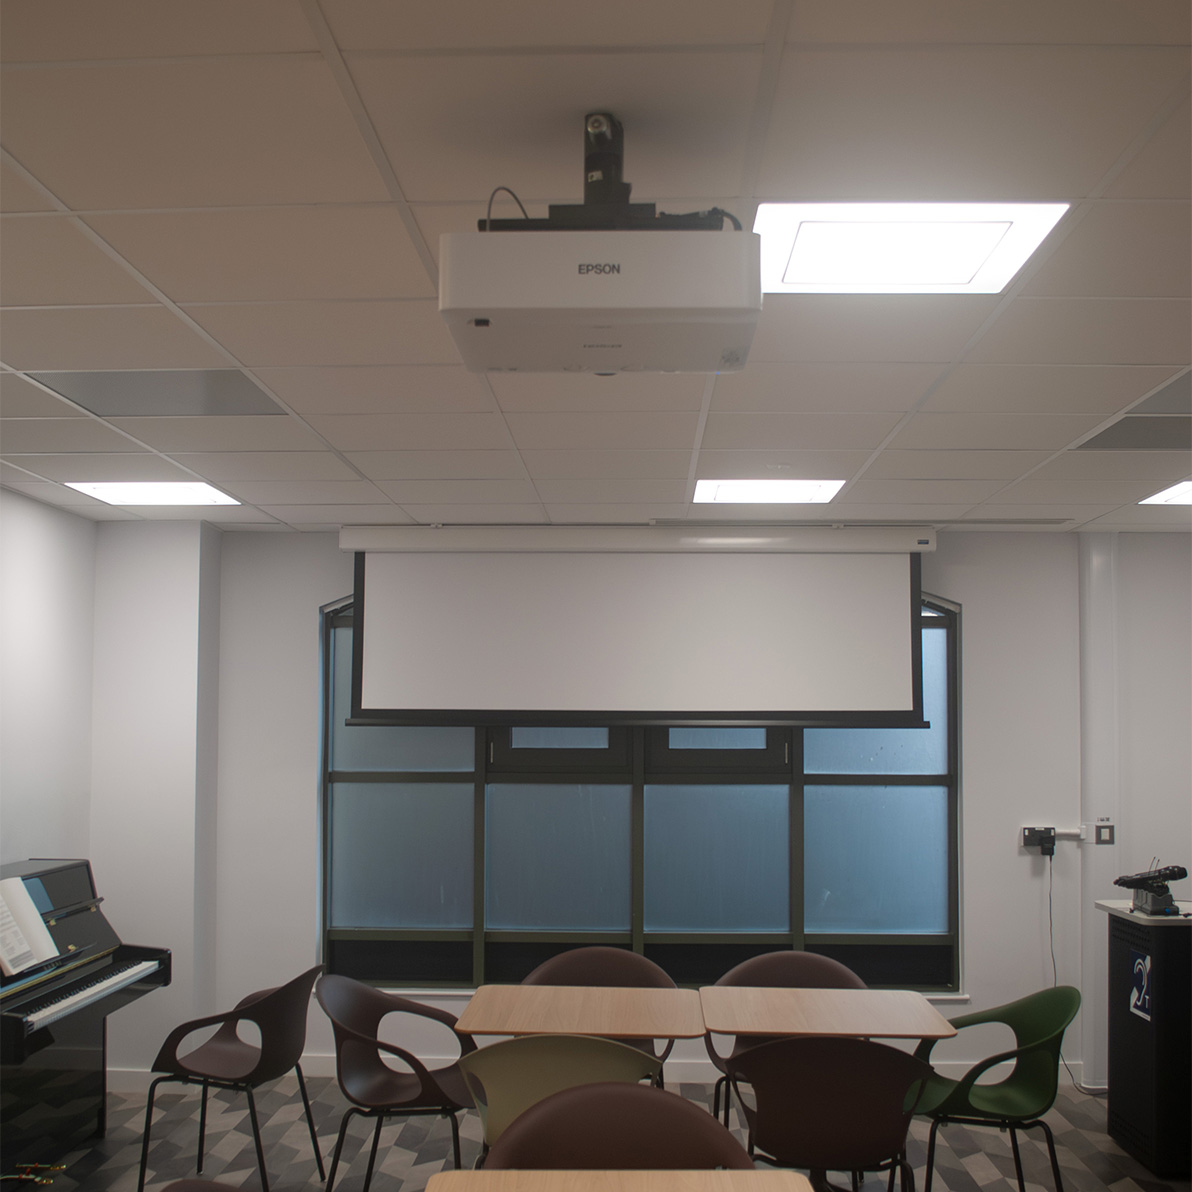 Epson projector in the University of Bristol